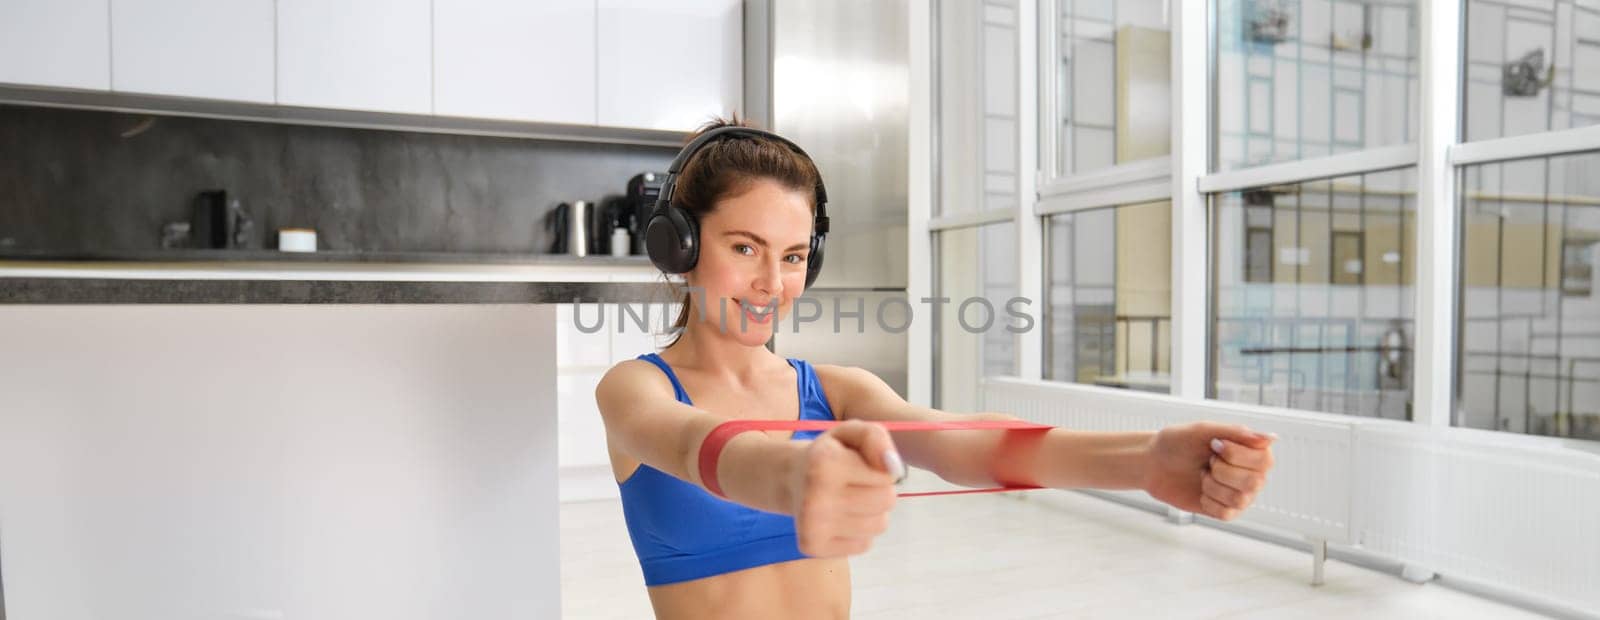 Focused sportswoman workout at home, using elastic resistance band on arms, stretching exercises in living room, aerobics training.